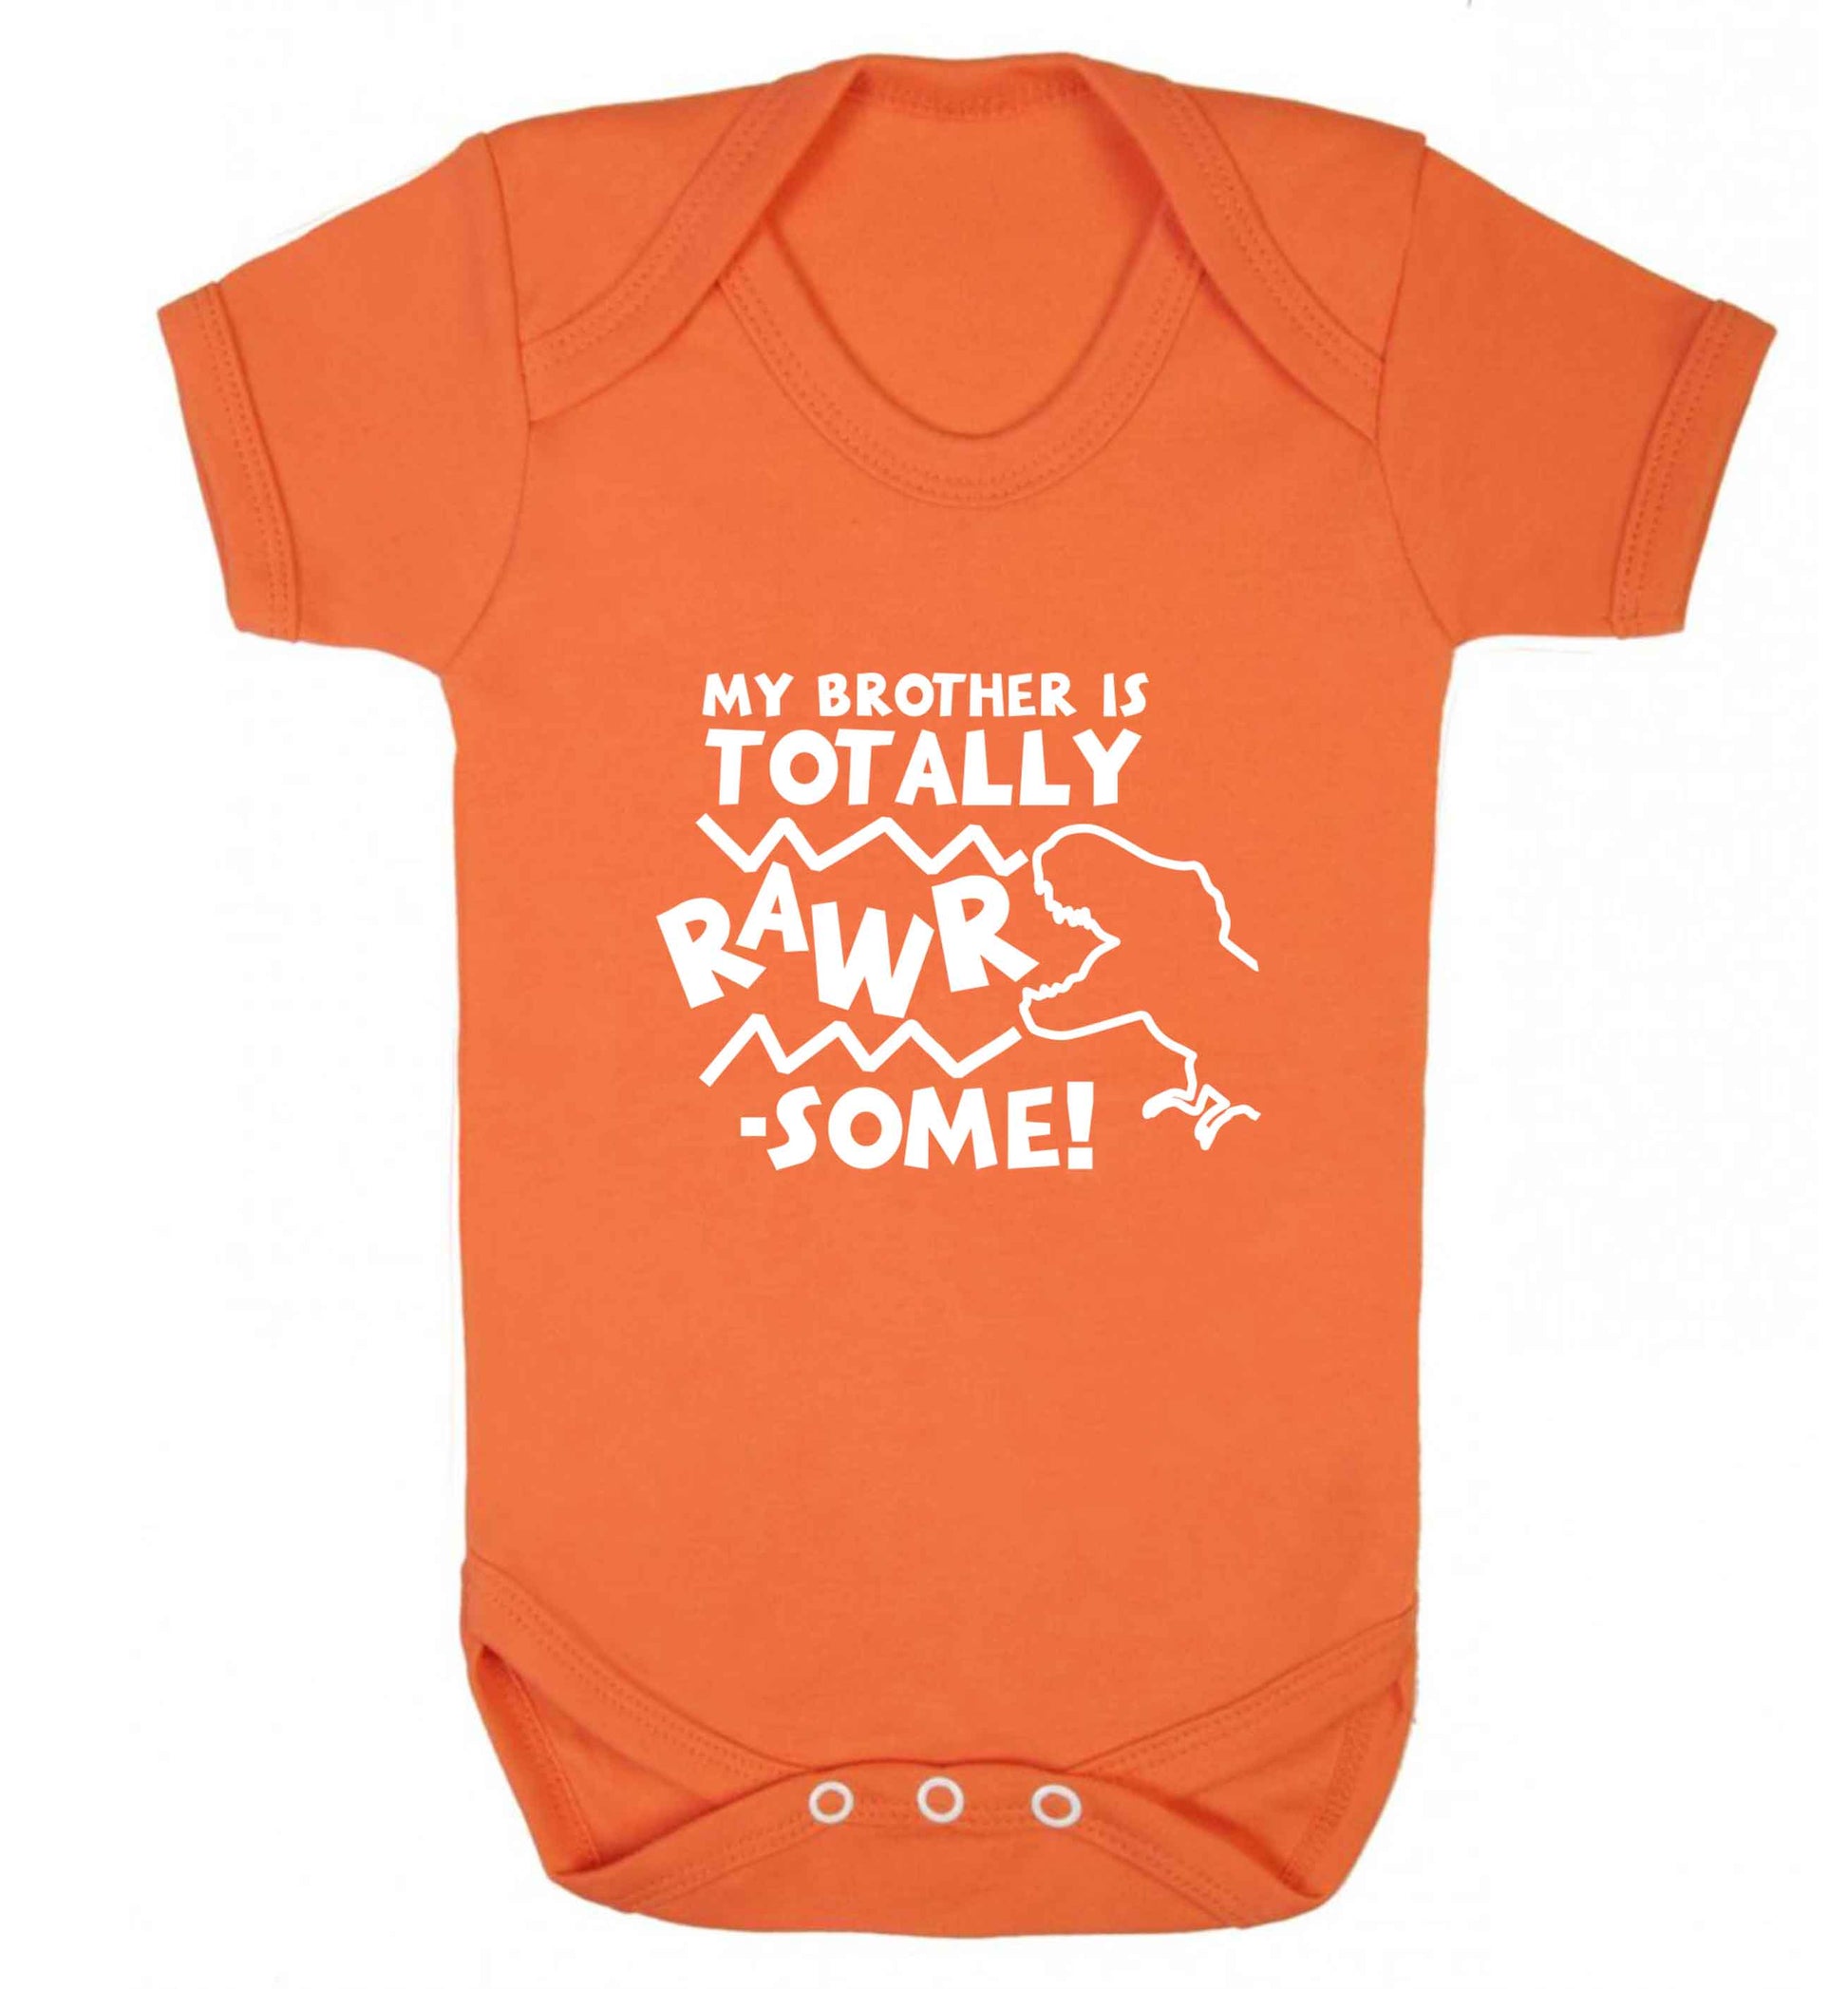 My brother is totally rawrsome baby vest orange 18-24 months